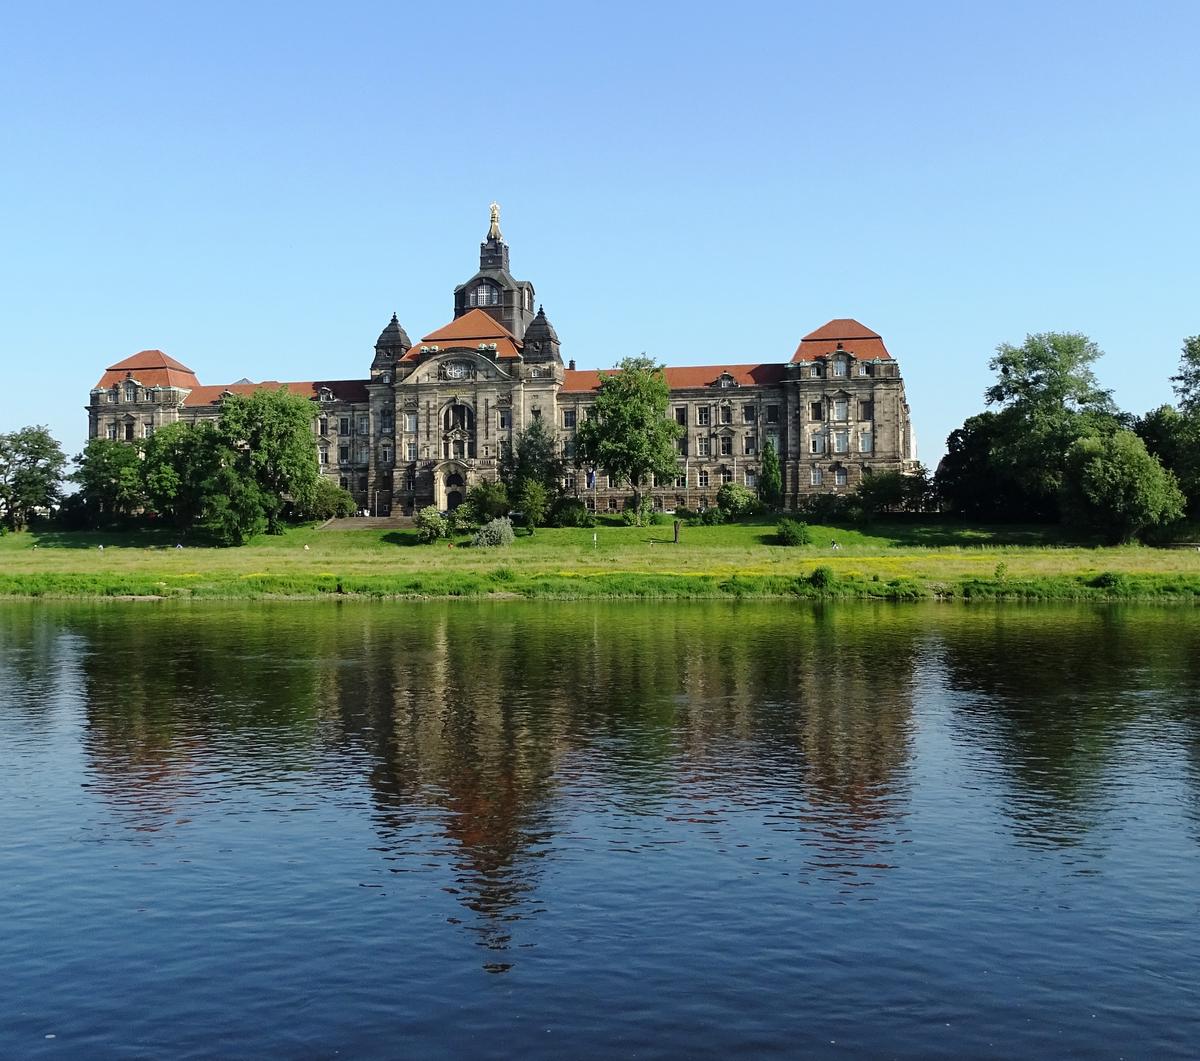 We docked across from the Parliament Building in Dresden. (John M. Smith)